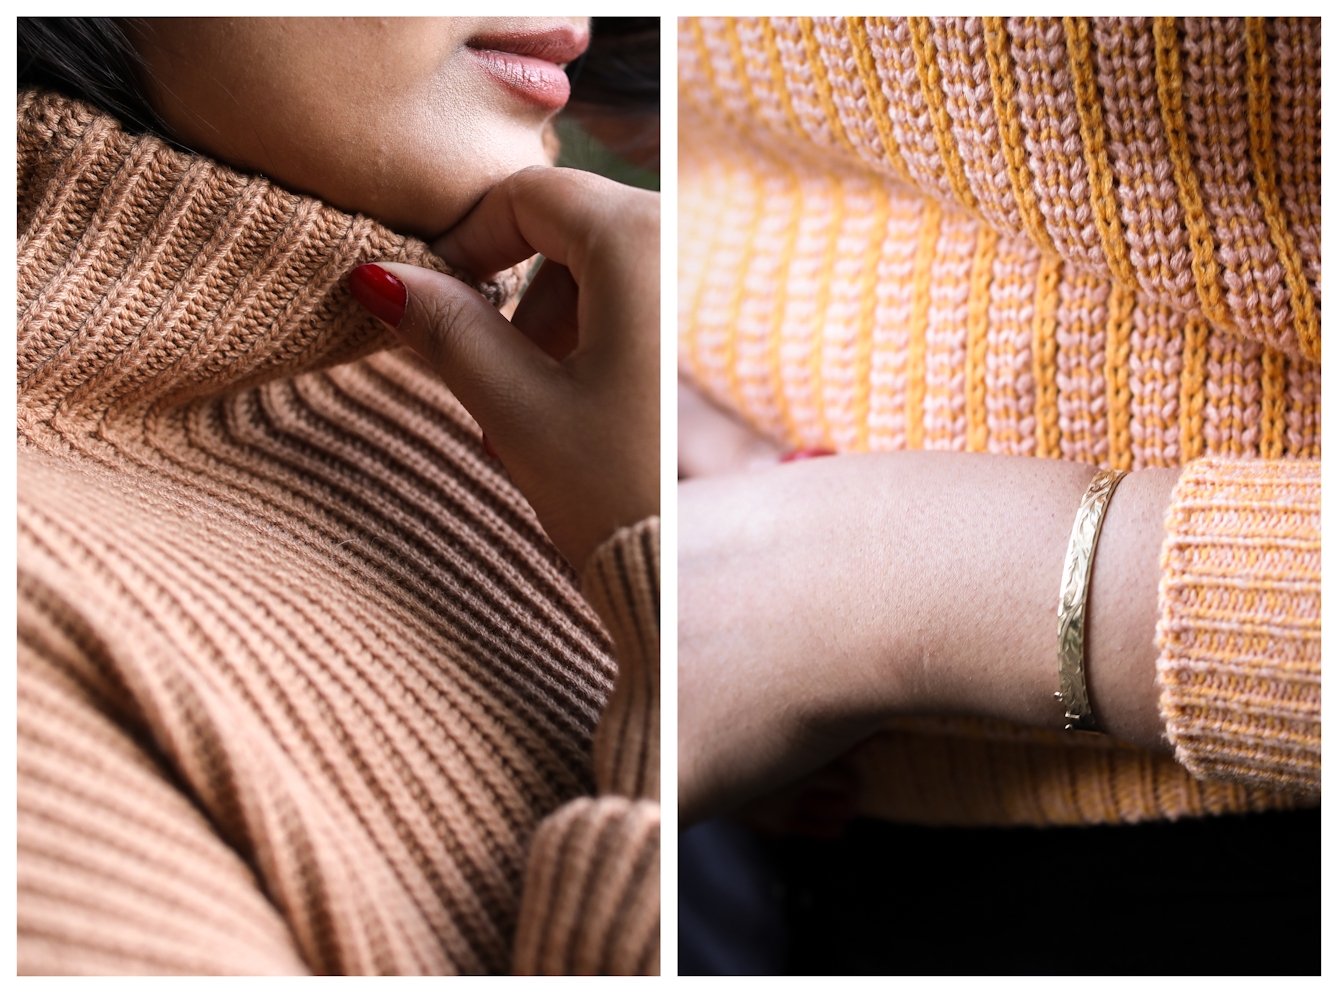 Photographic diptych. The image on the left shows a close-up of a woman wearing a woollen knitted high necked cream coloured jumper. At the top of the frame her lips can just be seen in profile. Her right hand is gently holding the top of the neck of the jumper between her thumb and forefinger. The texture of the jumper can clearly been seen. The image on the right is also a close-up of a woman wearing an orange patterned woollen knitted jumper, but shows her torso. Her left arm is held across her body and a short section of her skin can be seen around her wrist and lower arm. She is wearing a gold bracelet.